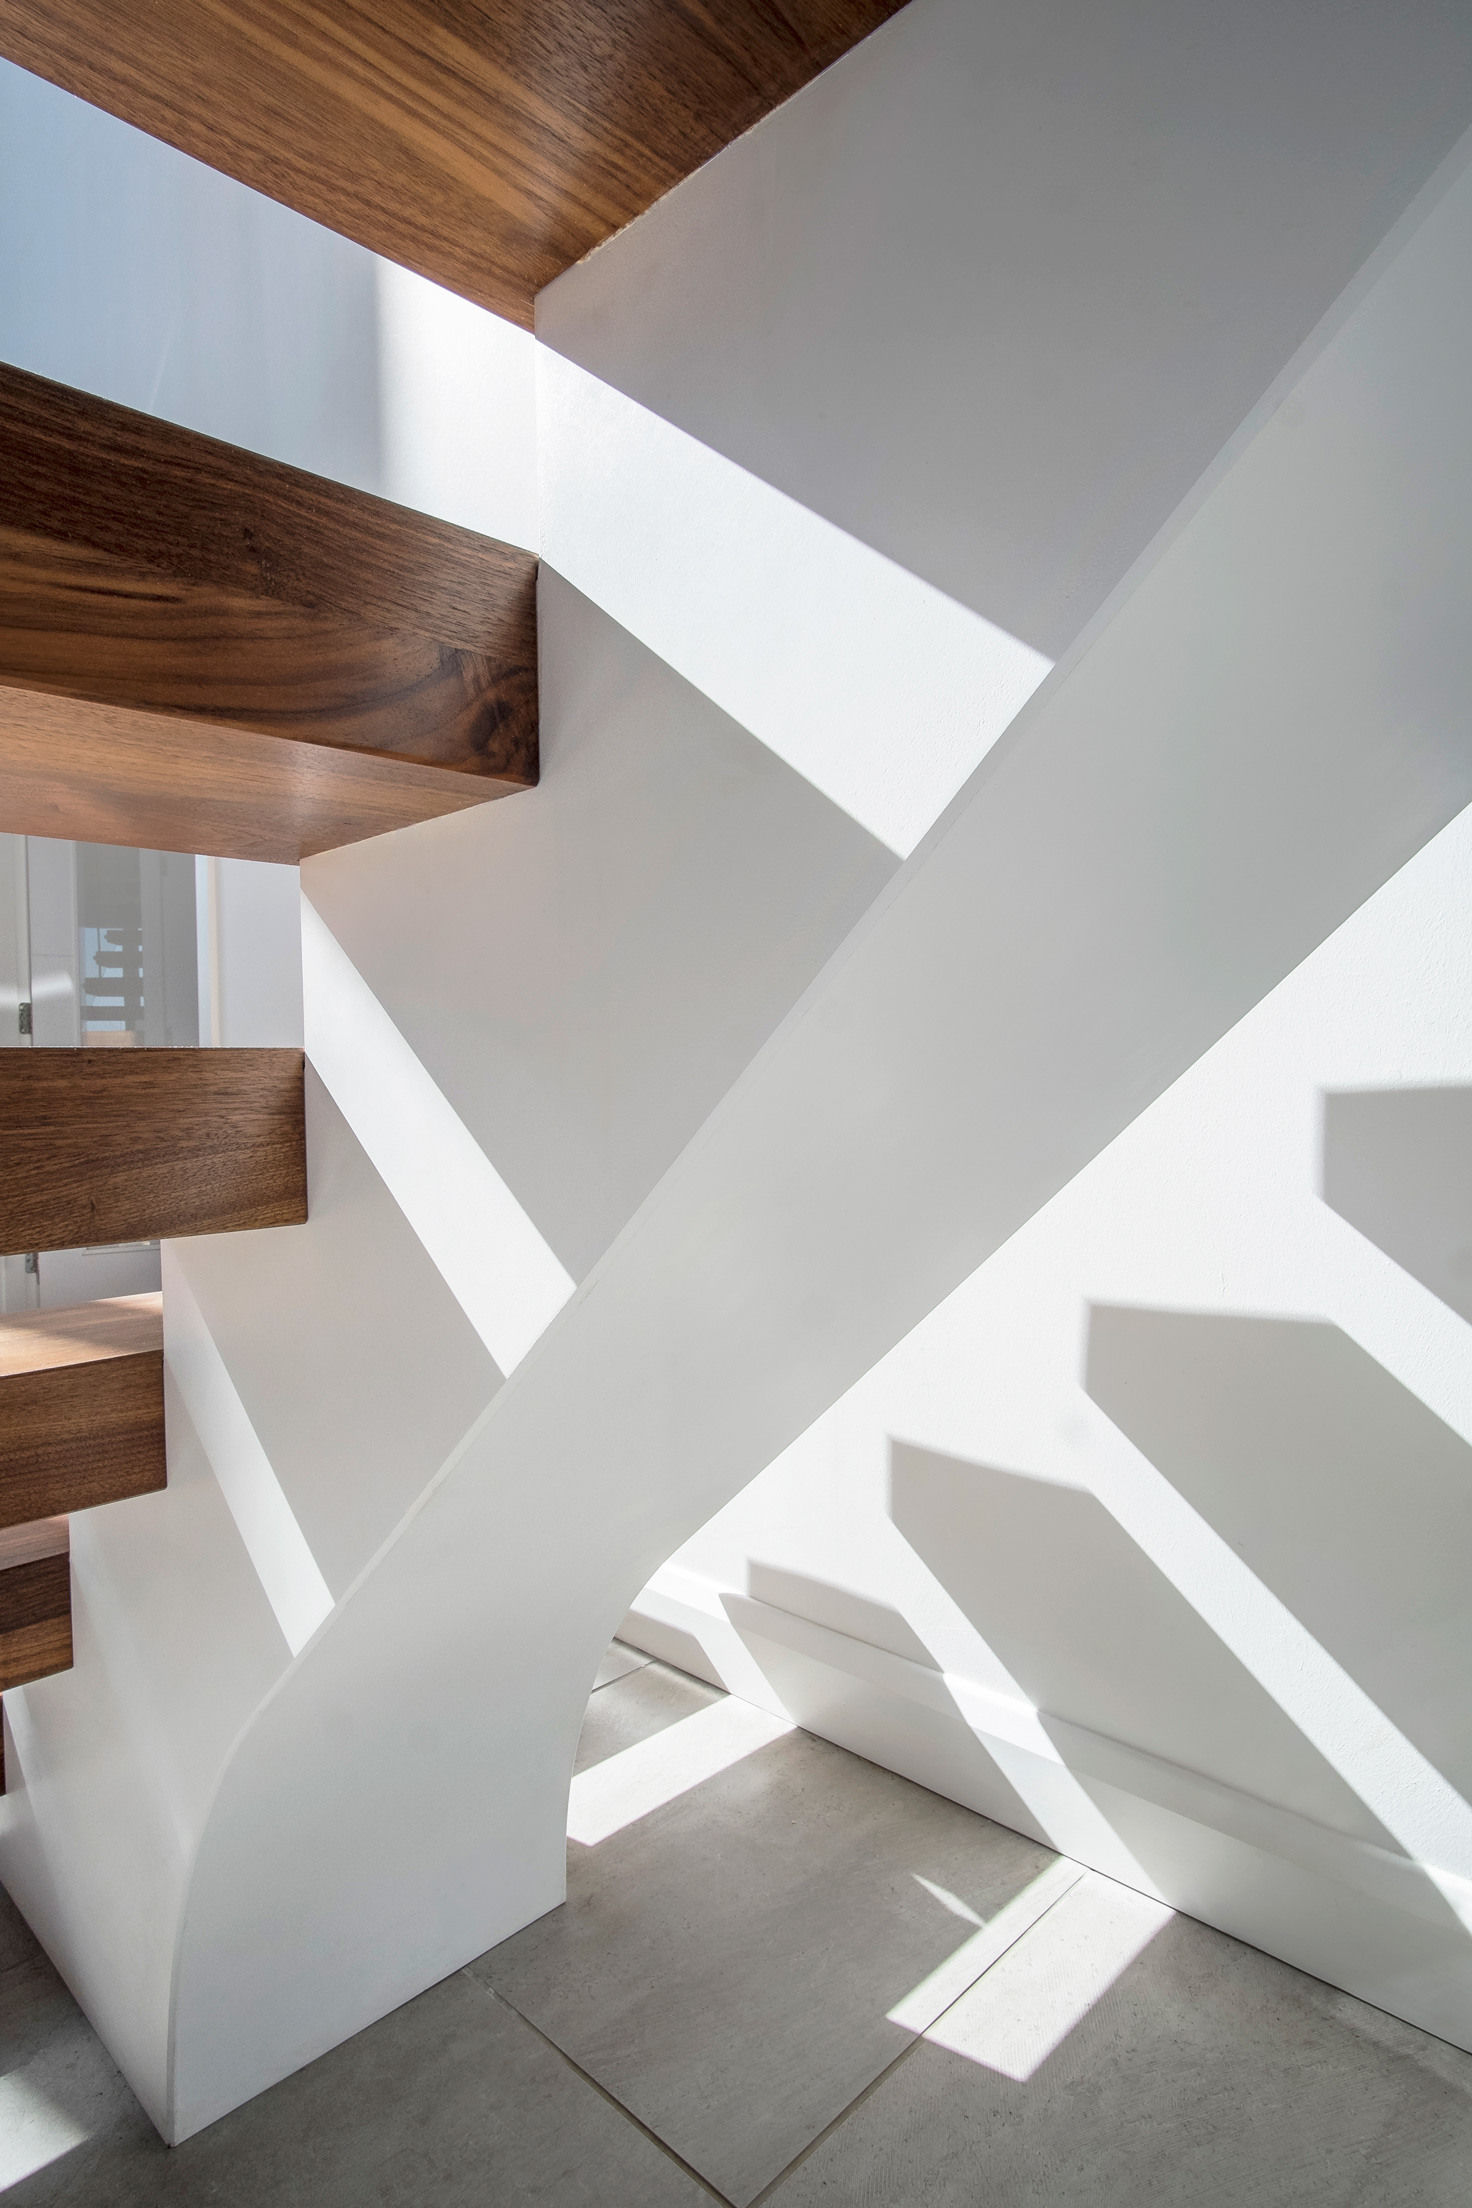 Underside of floating central stringer feature staircase with walnut treads, handrail and glass balustrade. Sunlight shining through spaces in staircase.